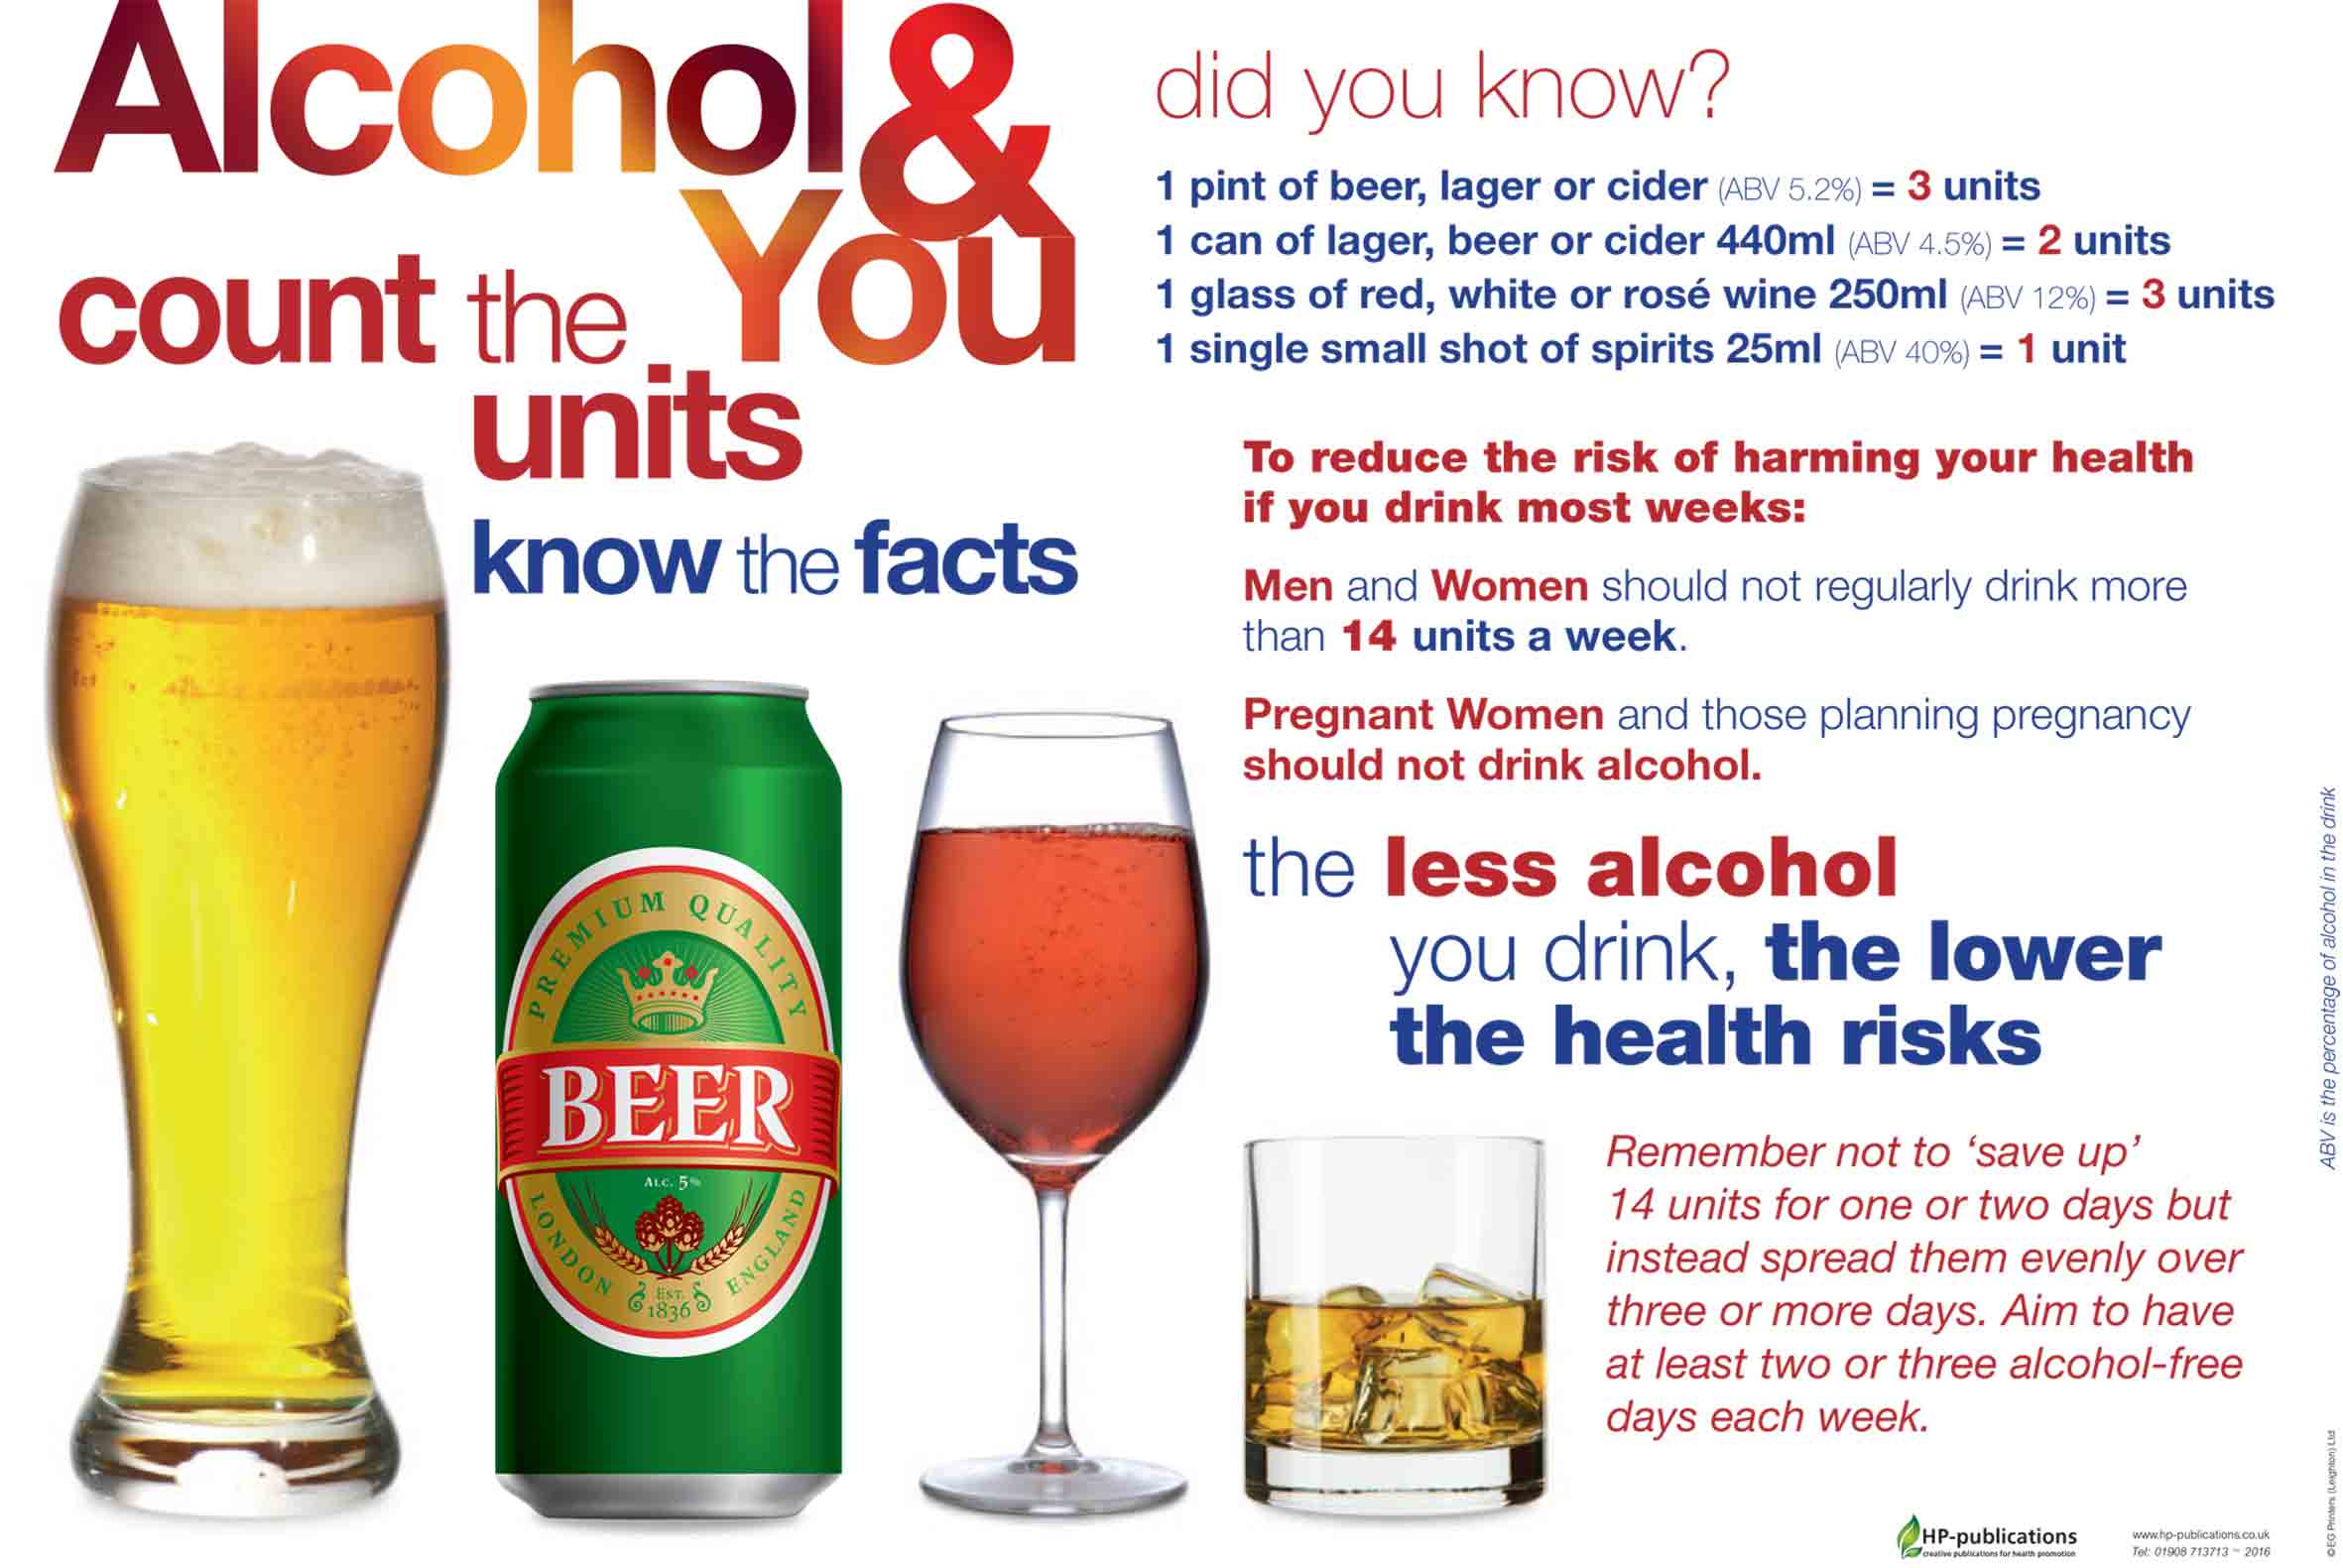 Alcohol & You: Count the units